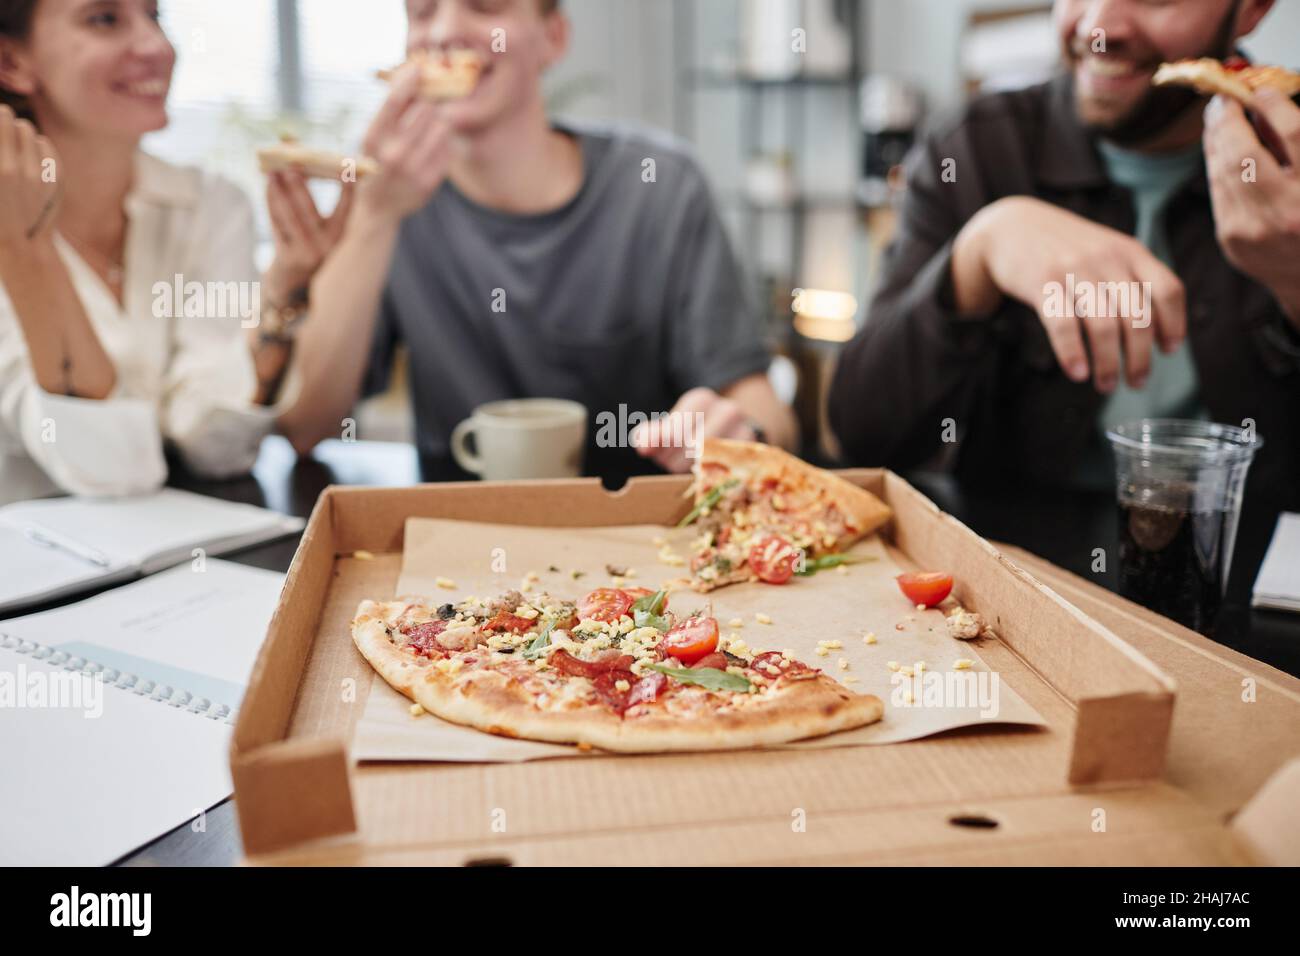 Close-up of fresh pizza in the opened box with business people having lunch at the table in the background Stock Photo